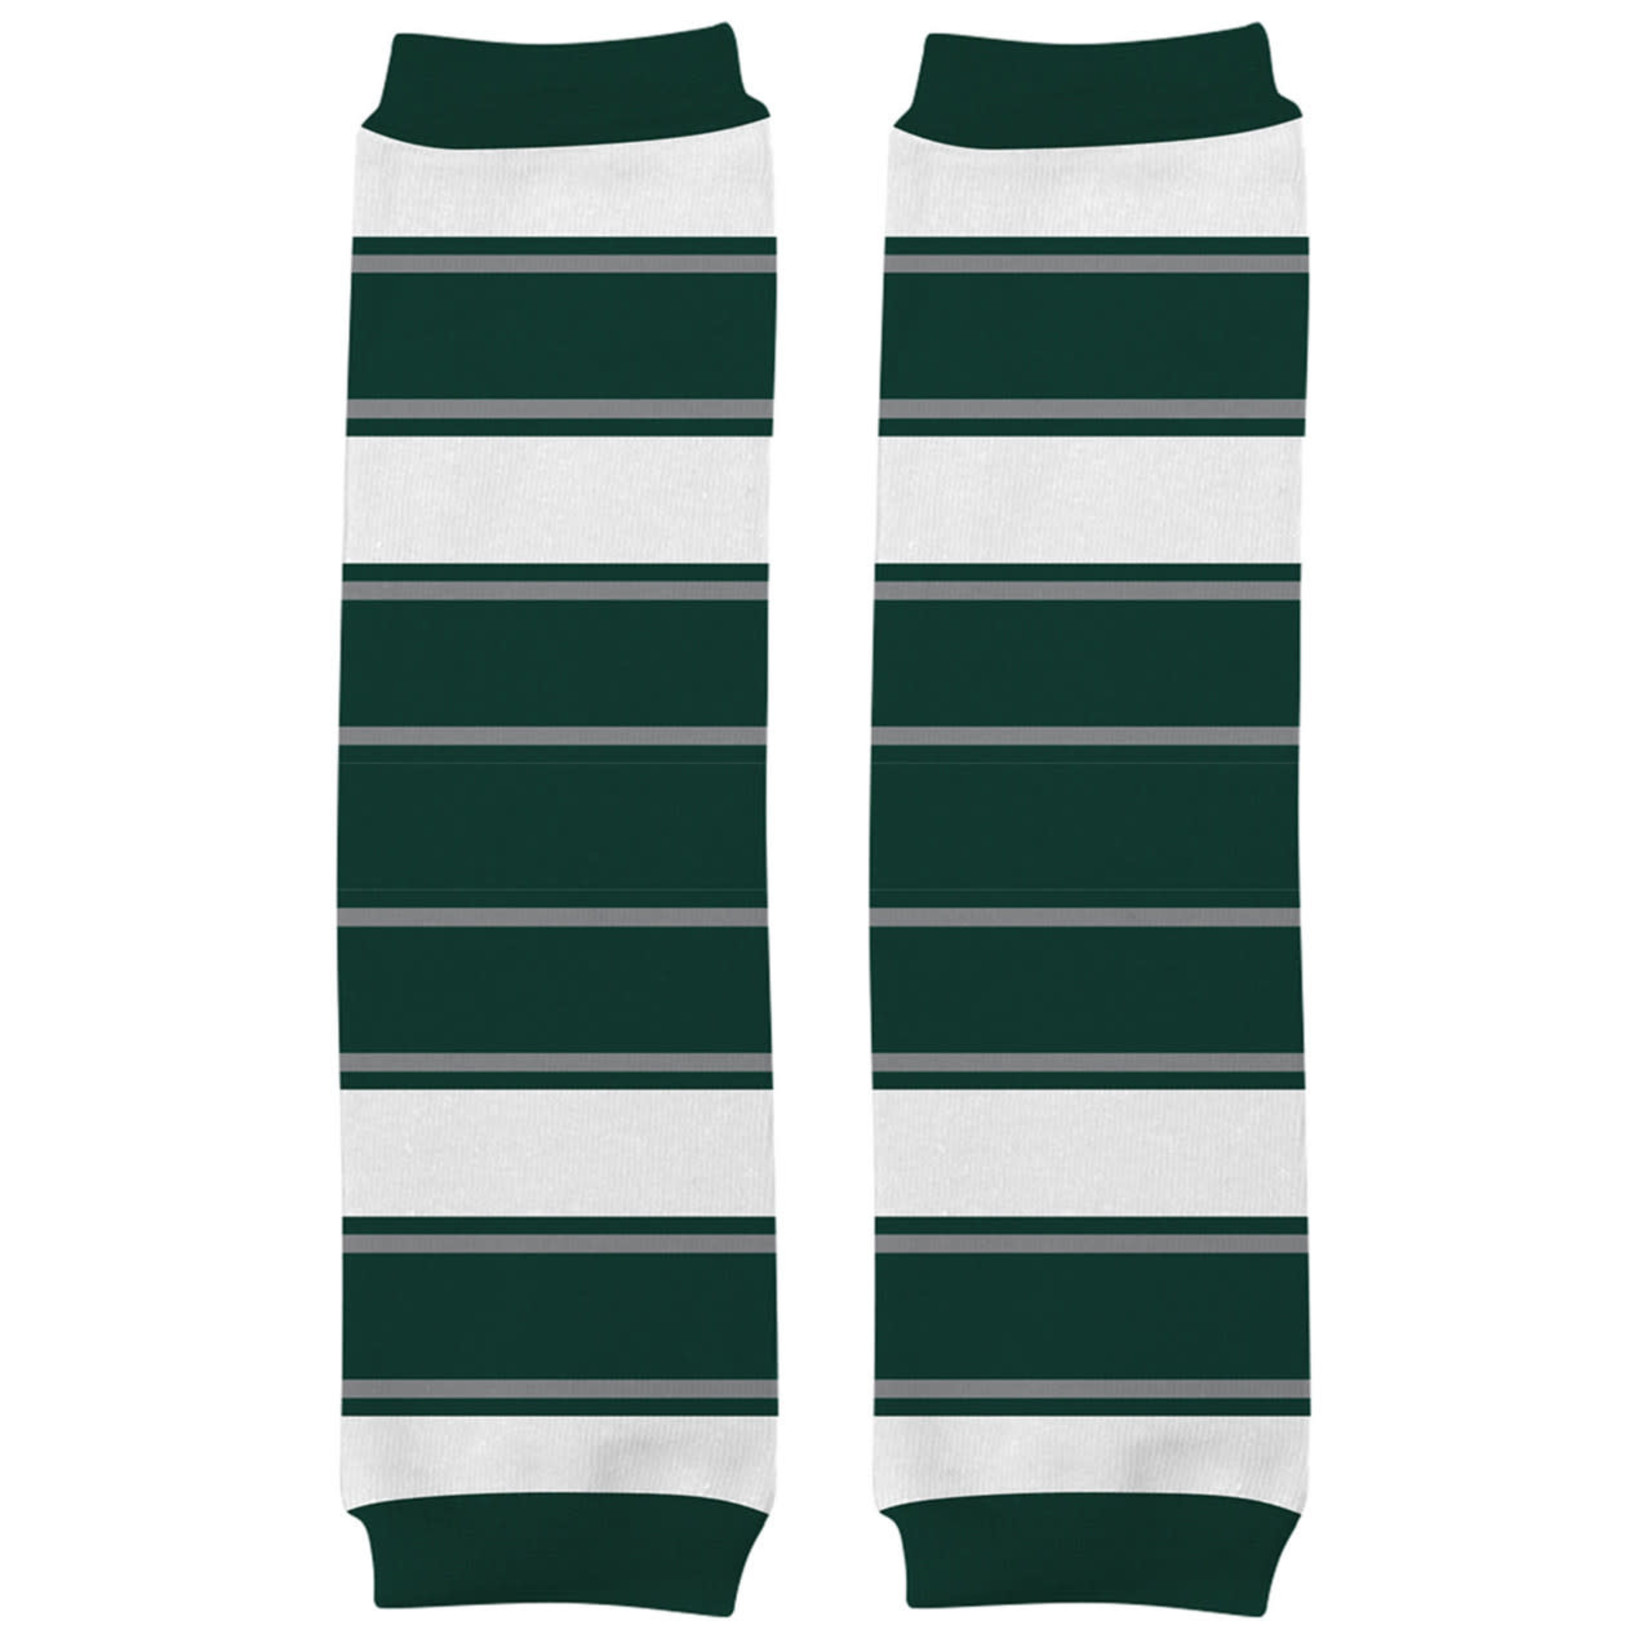 Baby Fanatic NCAA Michigan State Spartans Toddler & Baby Unisex Crawler Leg Warmers